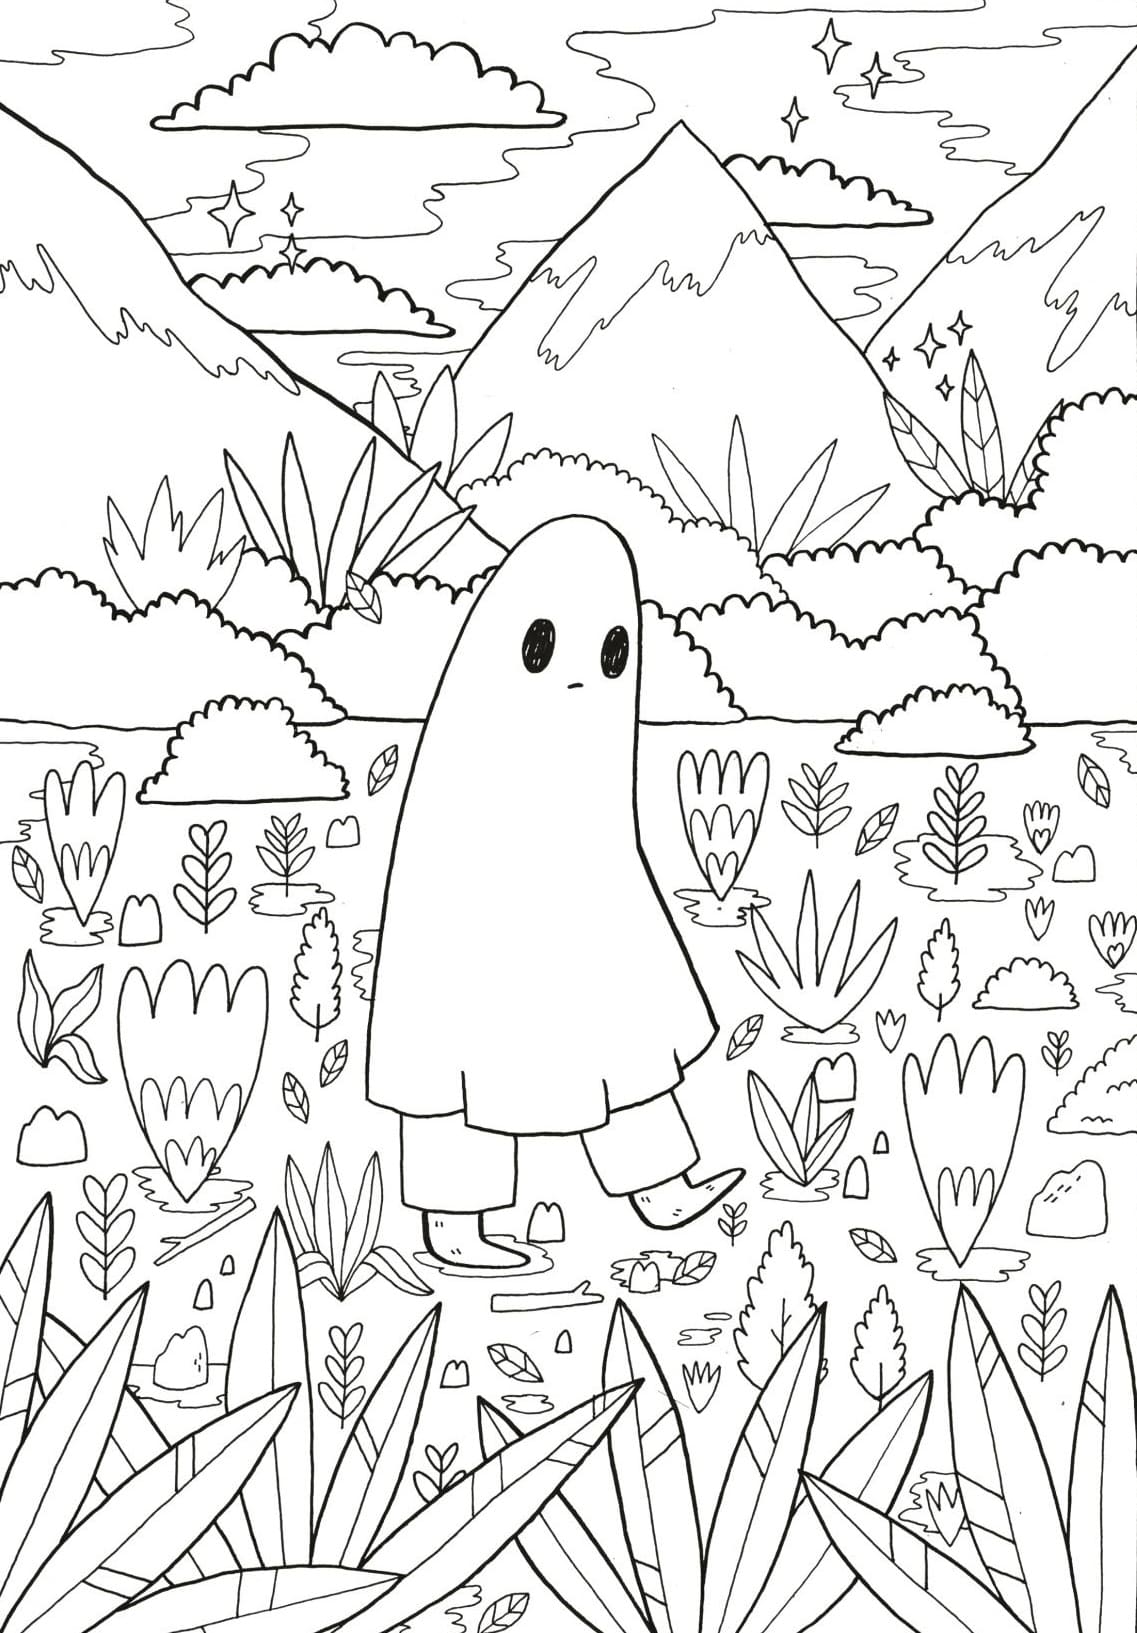 Aesthetic coloring pages Free